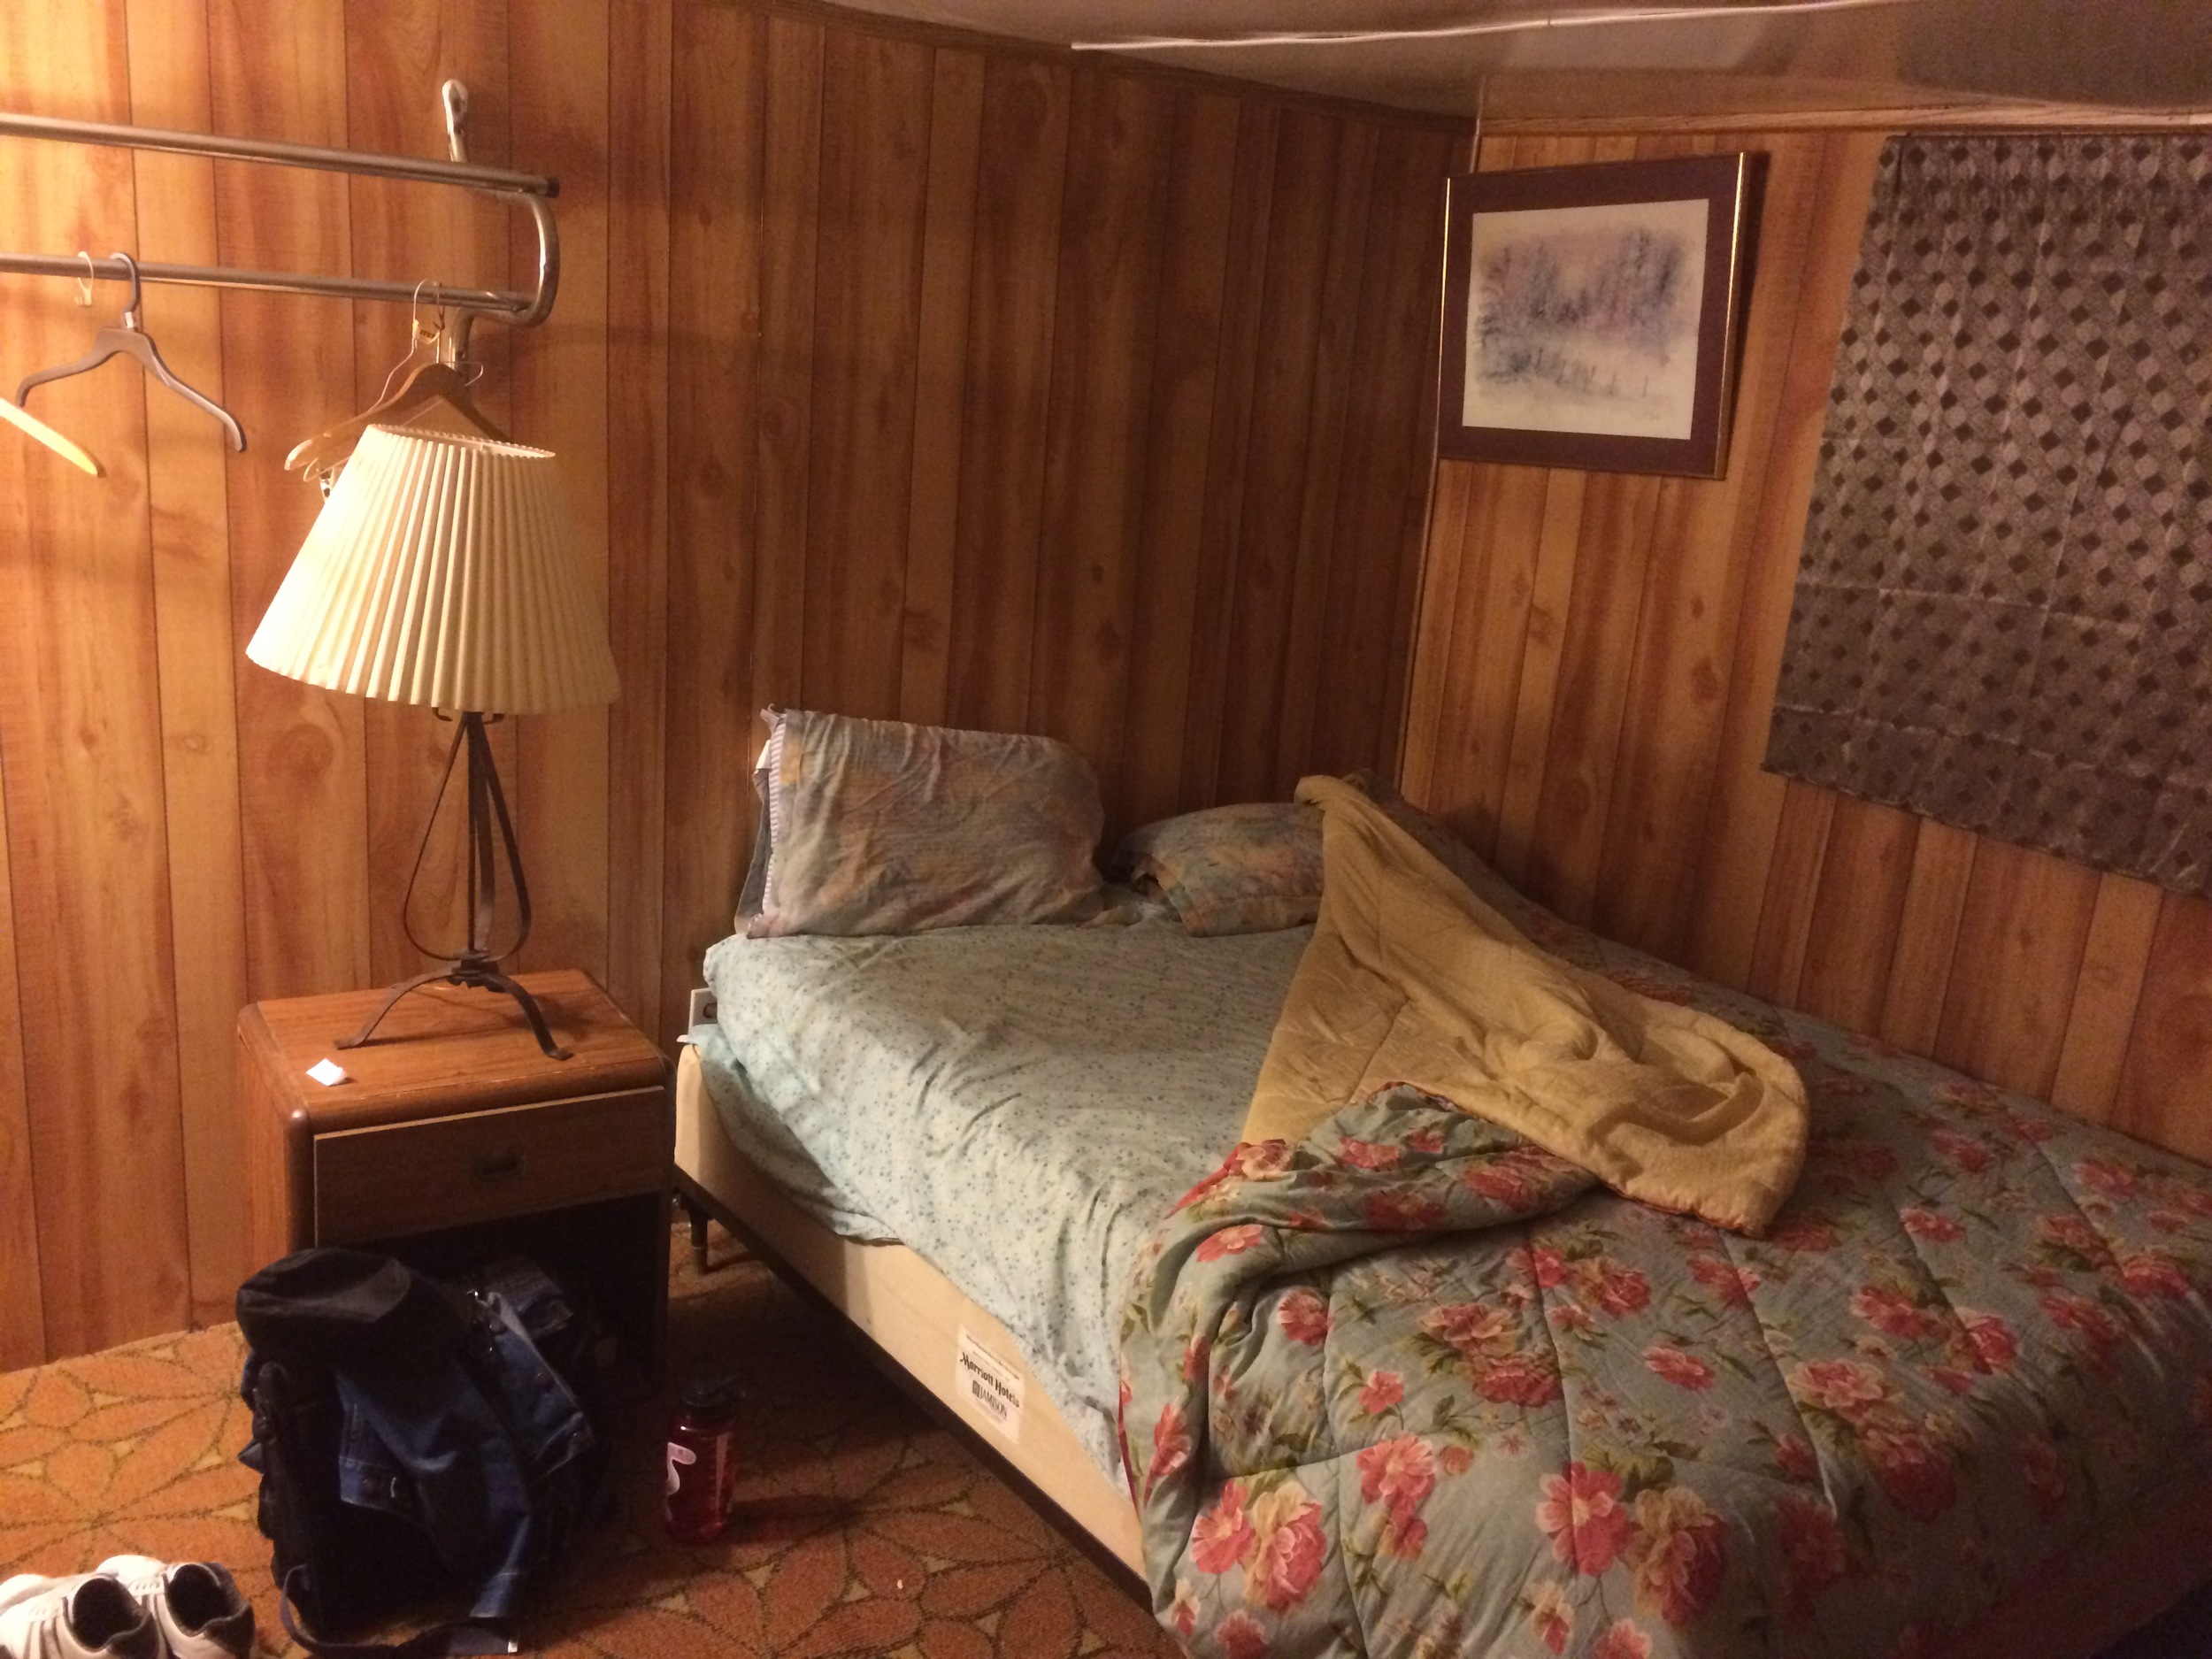  Funny little room I stayed at in Erie, PA. 